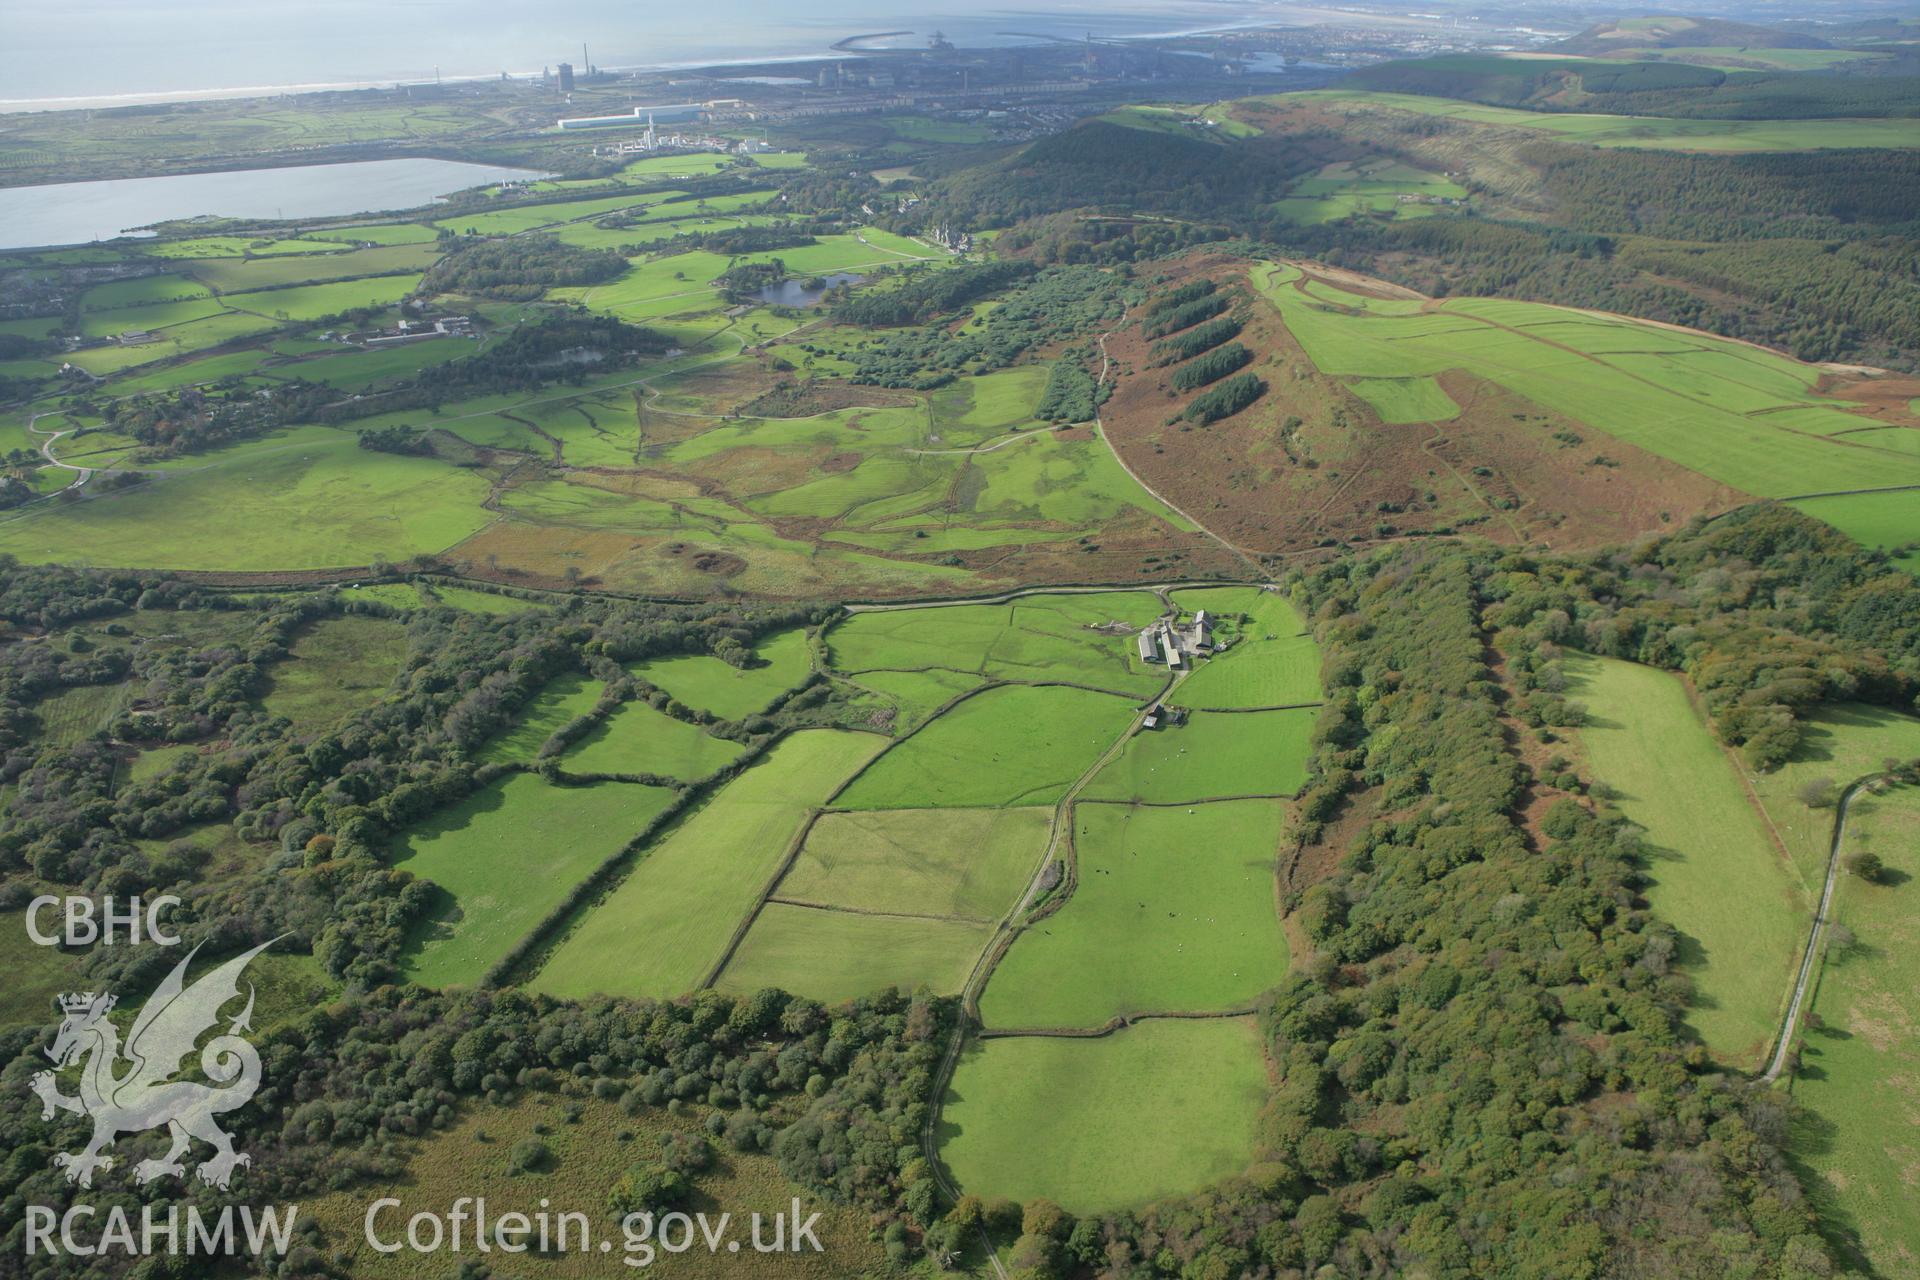 RCAHMW colour oblique photograph of landcape looking west over Margam Country Park to Margam Moors. Taken by Toby Driver on 16/10/2008.